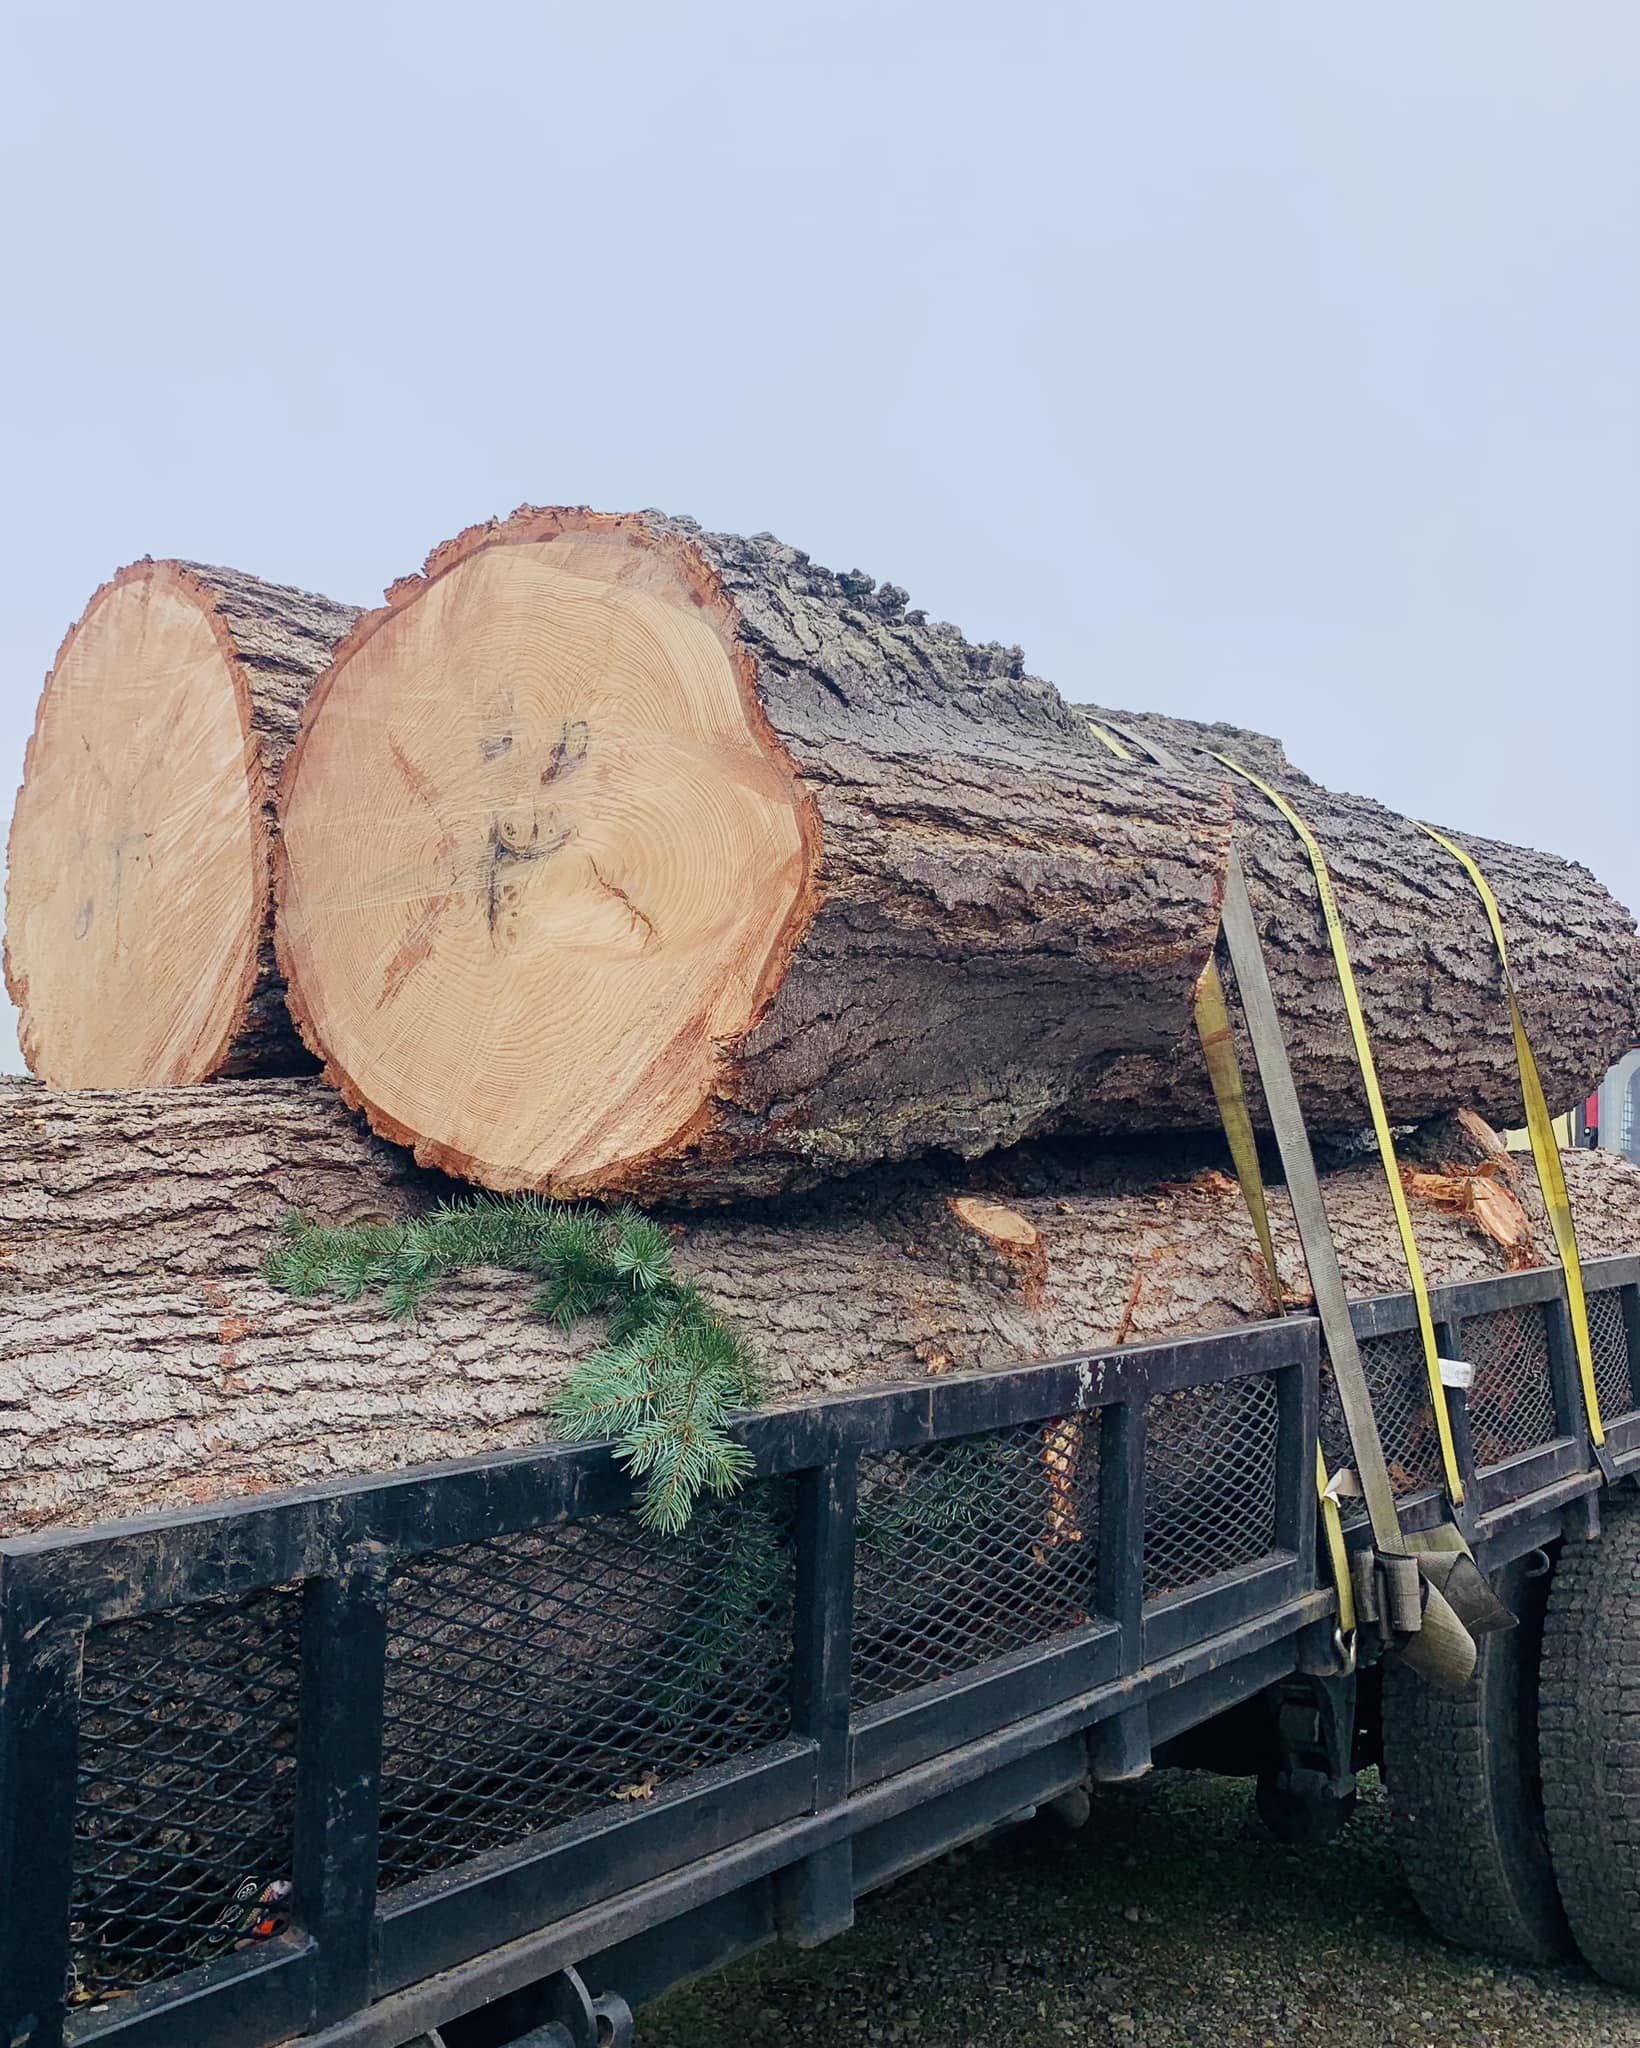 Large cut tree trunks on a trailer